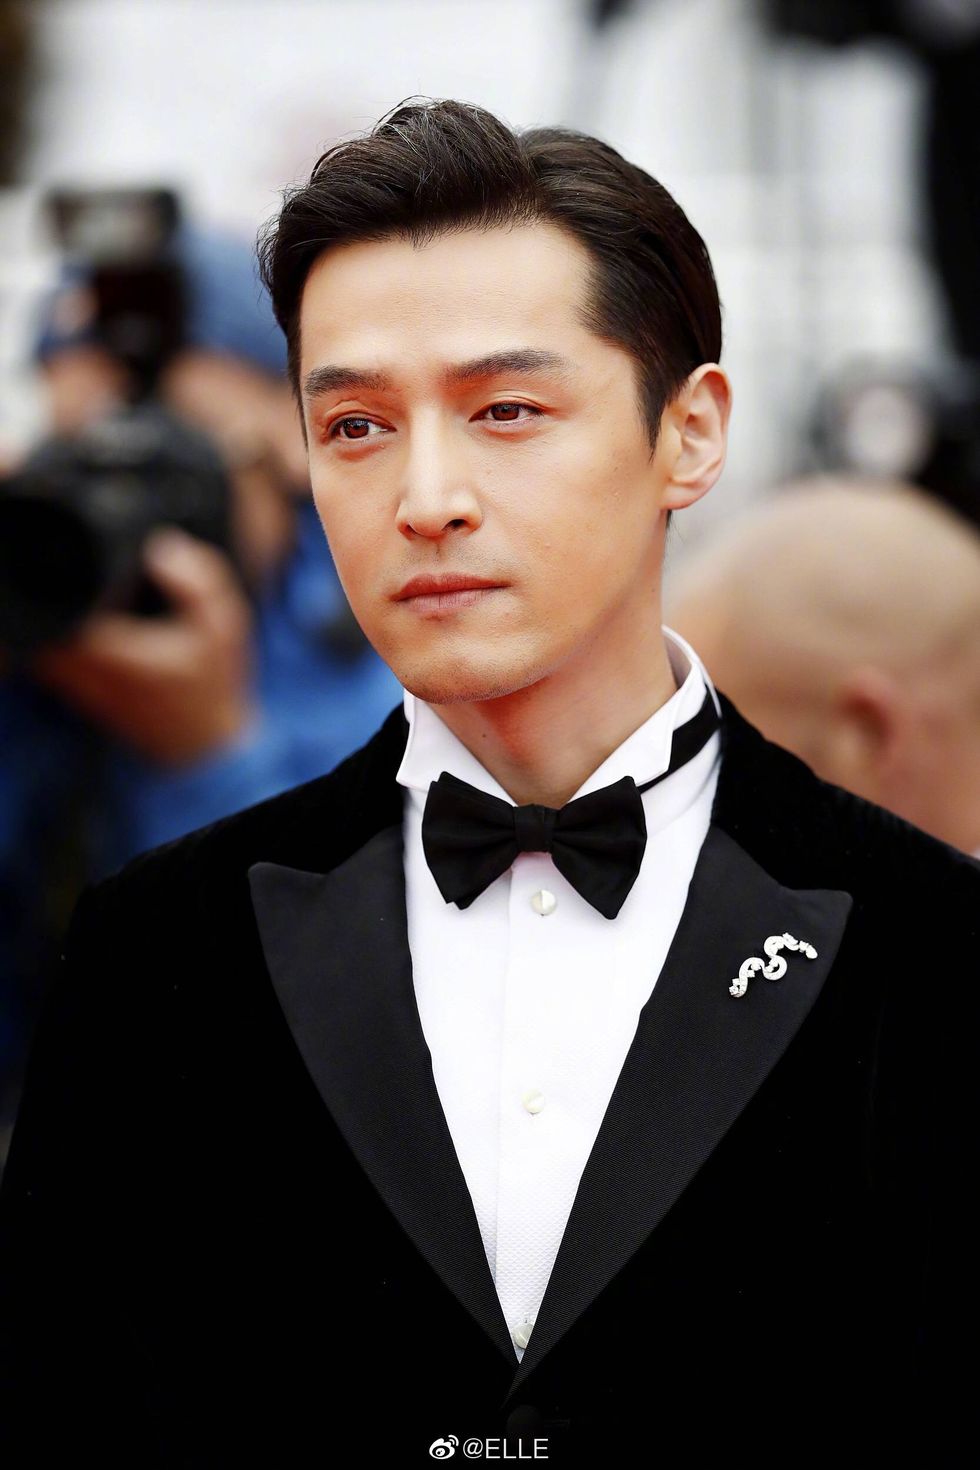 Hair, Suit, Formal wear, Hairstyle, Chin, Forehead, Tuxedo, Fashion, White-collar worker, Premiere, 